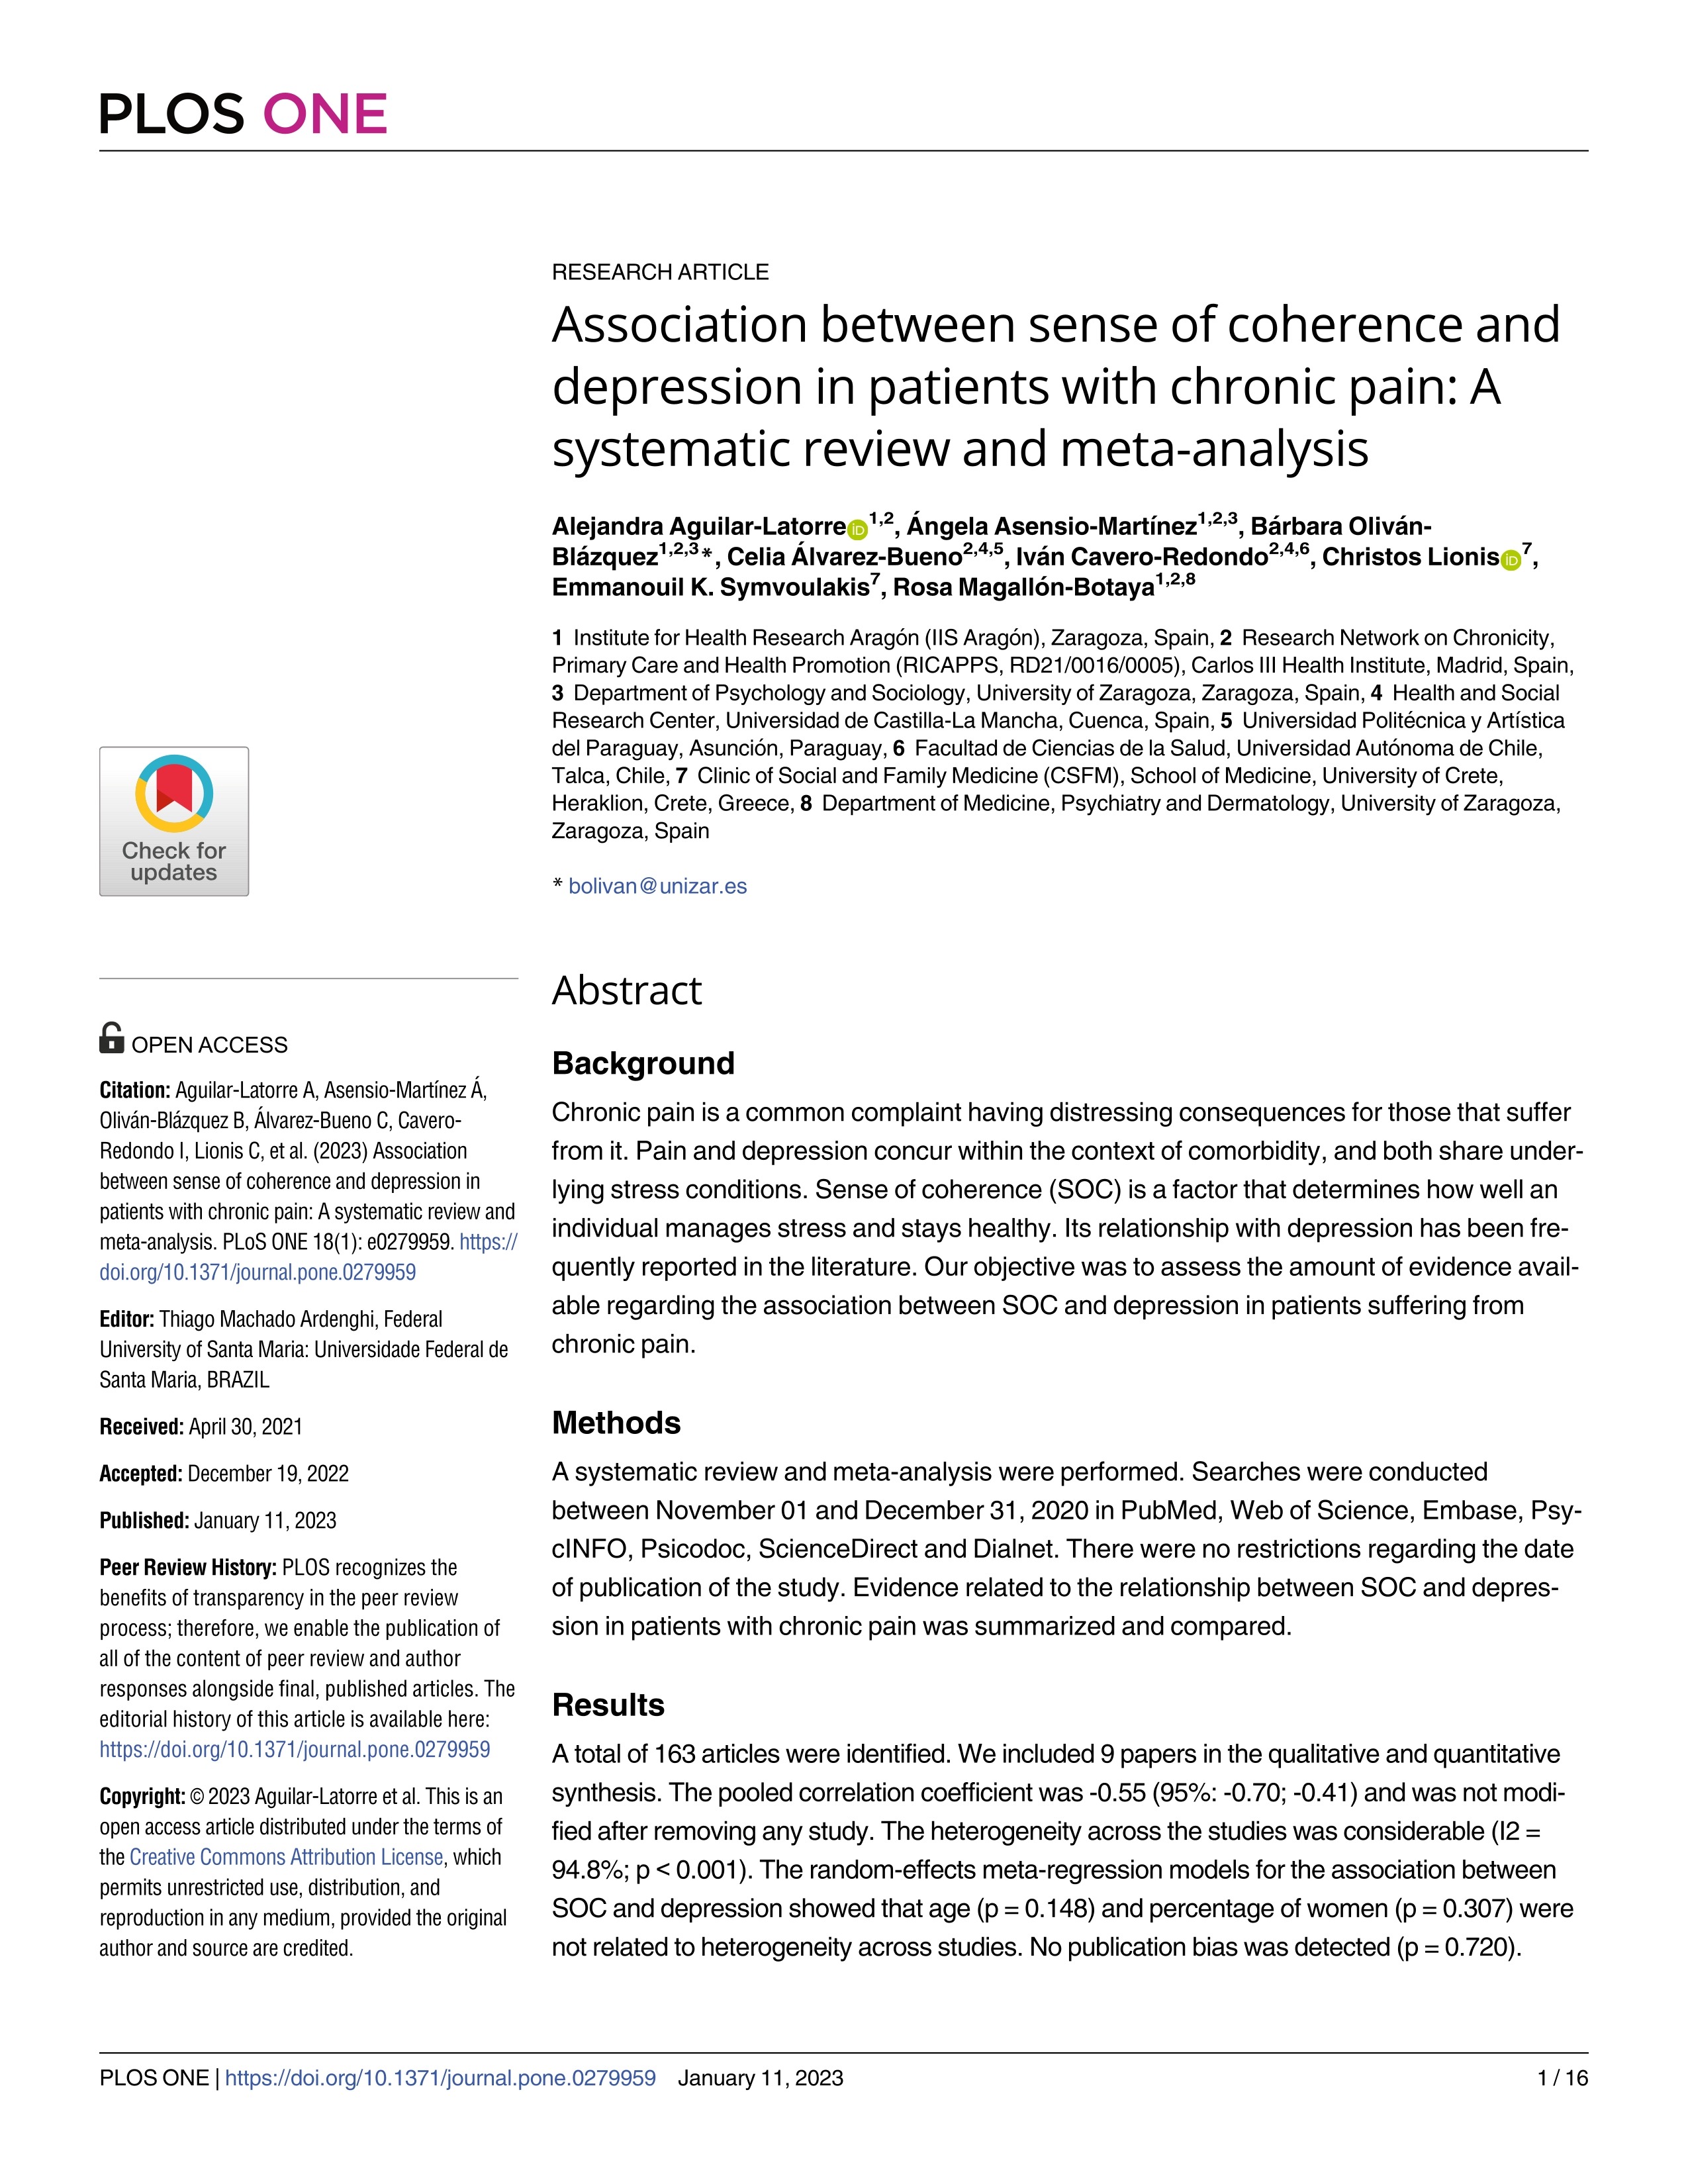 Association between sense of coherence and depression in patients with chronic pain: A systematic review and meta-analysis